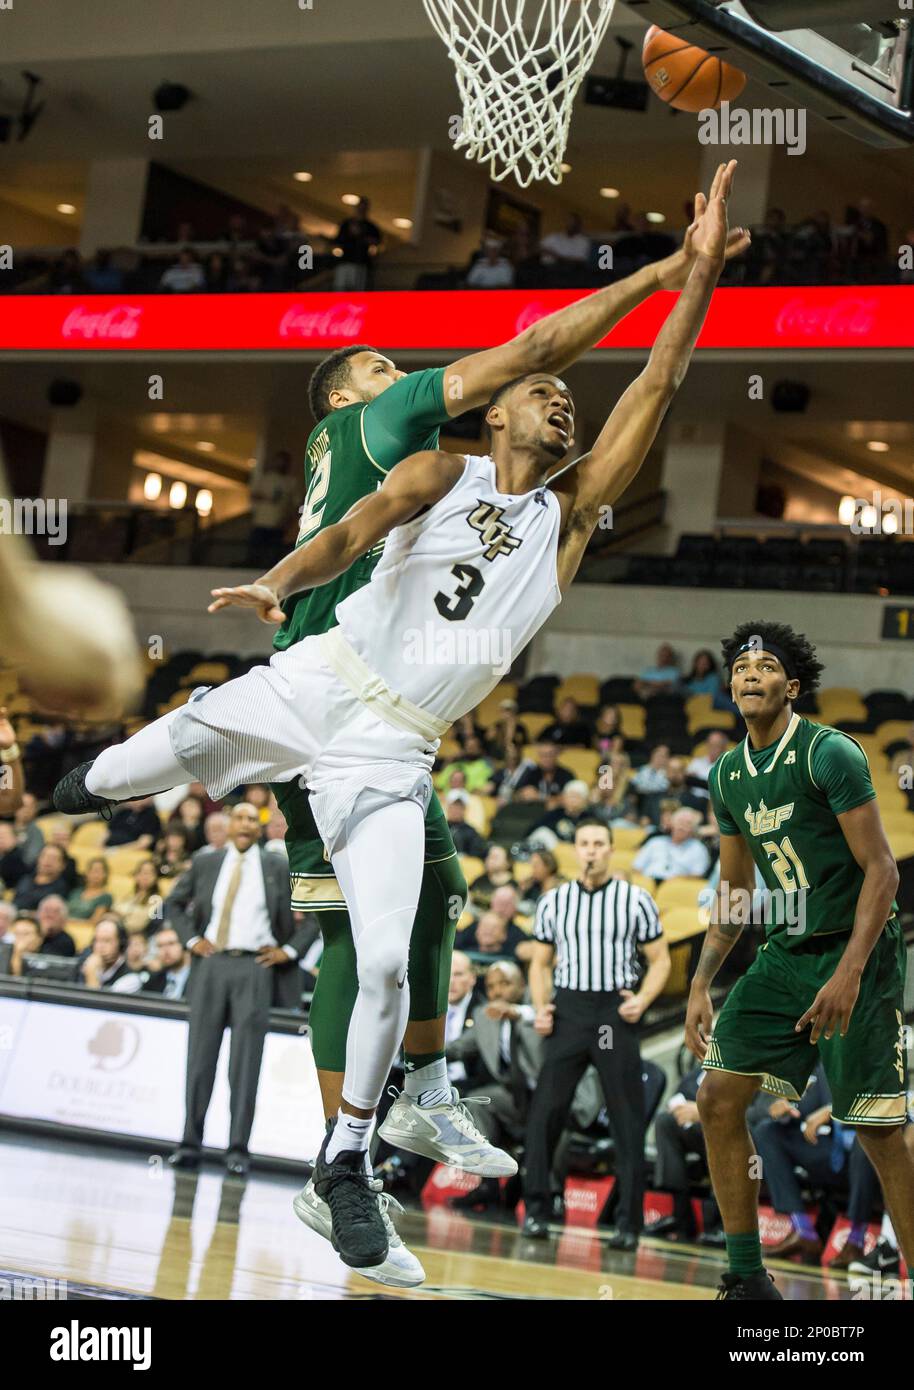 January 17, 2017 - Orlando, FL, U.S: Central Florida guard A.J. Davis (3)  is fouled under the basket by South Florida forward Luis Santos (42) during  a NCAA basketball game between the